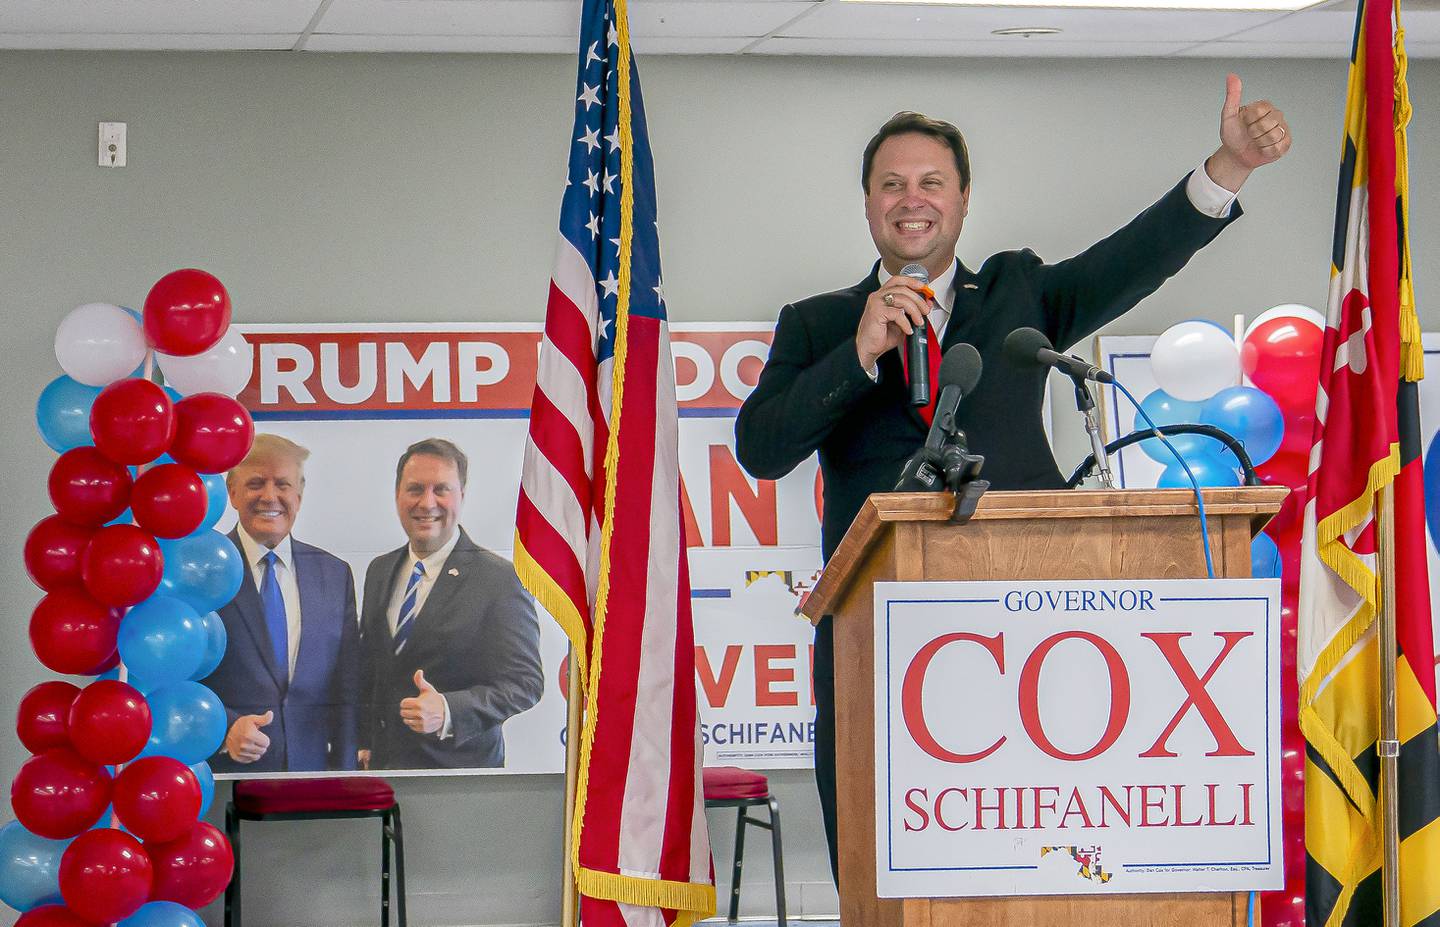 EMMITSBURG, MD - JULY 19:  Republican gubernatorial candidate Dan Cox reacts to his primary win on July 19, 2022 in Emmitsburg, Maryland. Cox, who is supported by former President Donald Trump, is running to replace term-limited Republican Gov. Larry Hogan.